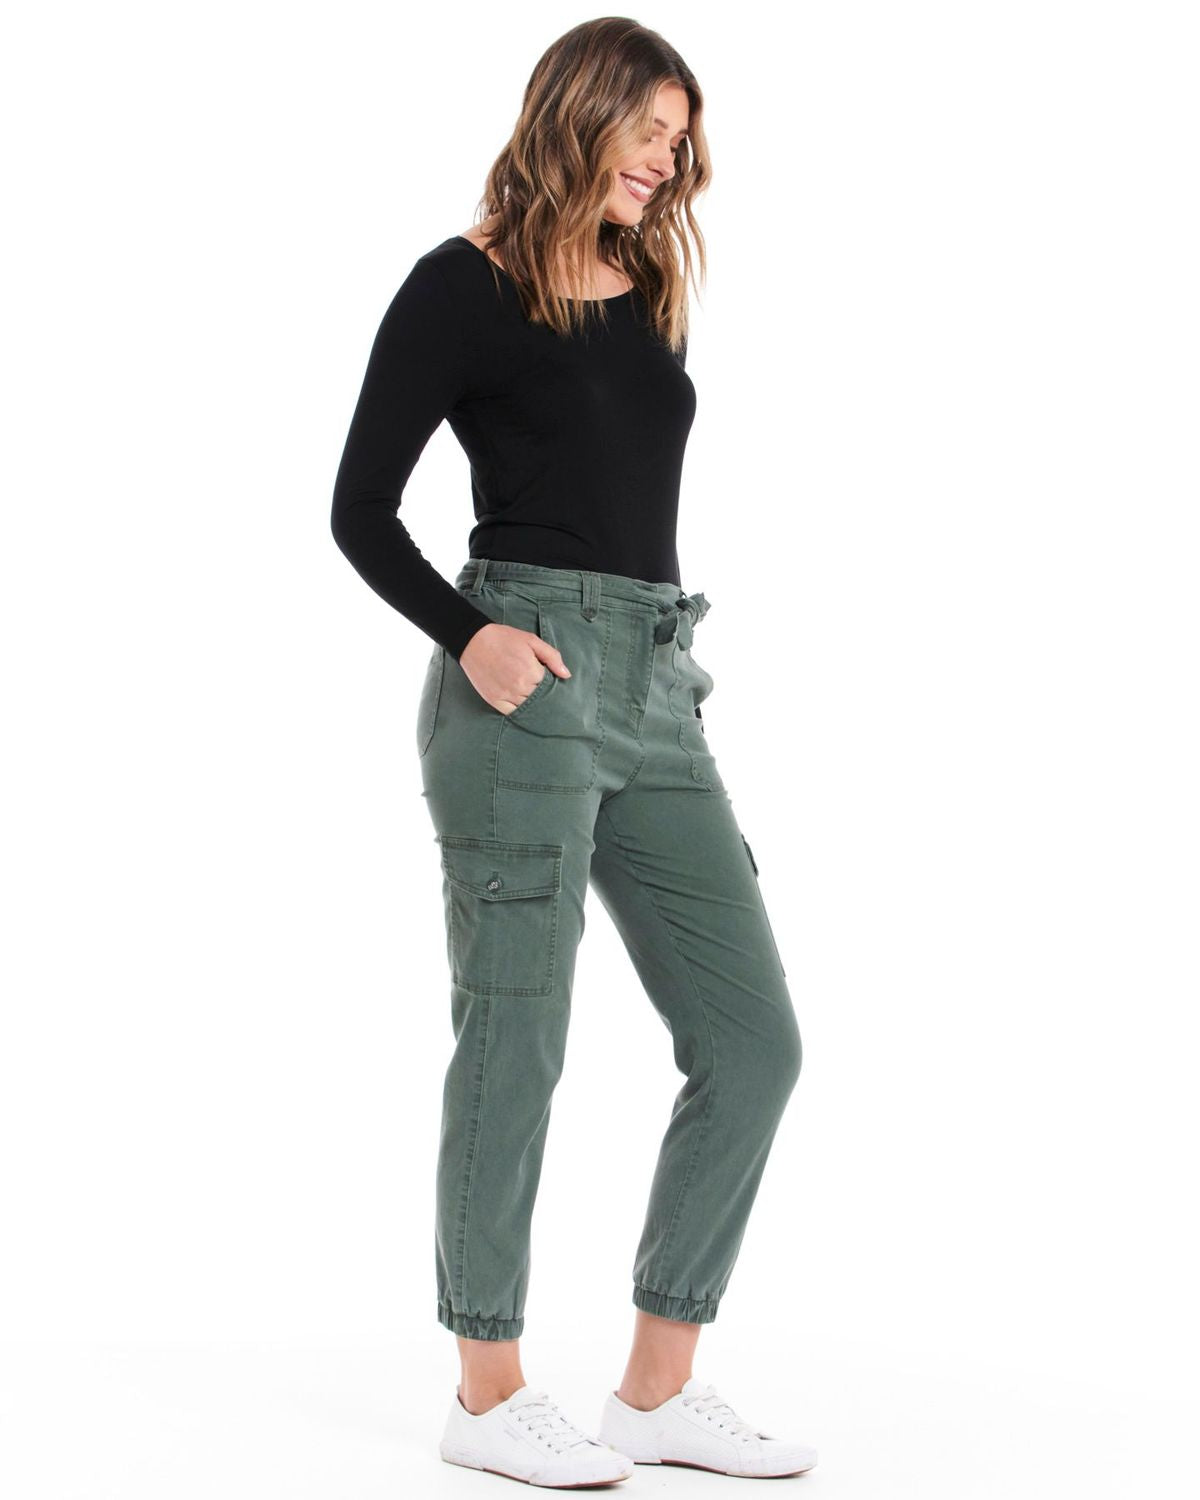 Canterbury Lyocell Cargo Pants: The cargo pant is THE must-have trend of the season, and we've made it even better with our comfy and stretchy lyocell fabric. The elastic back waist means you can e - Ciao Bella Dresses 